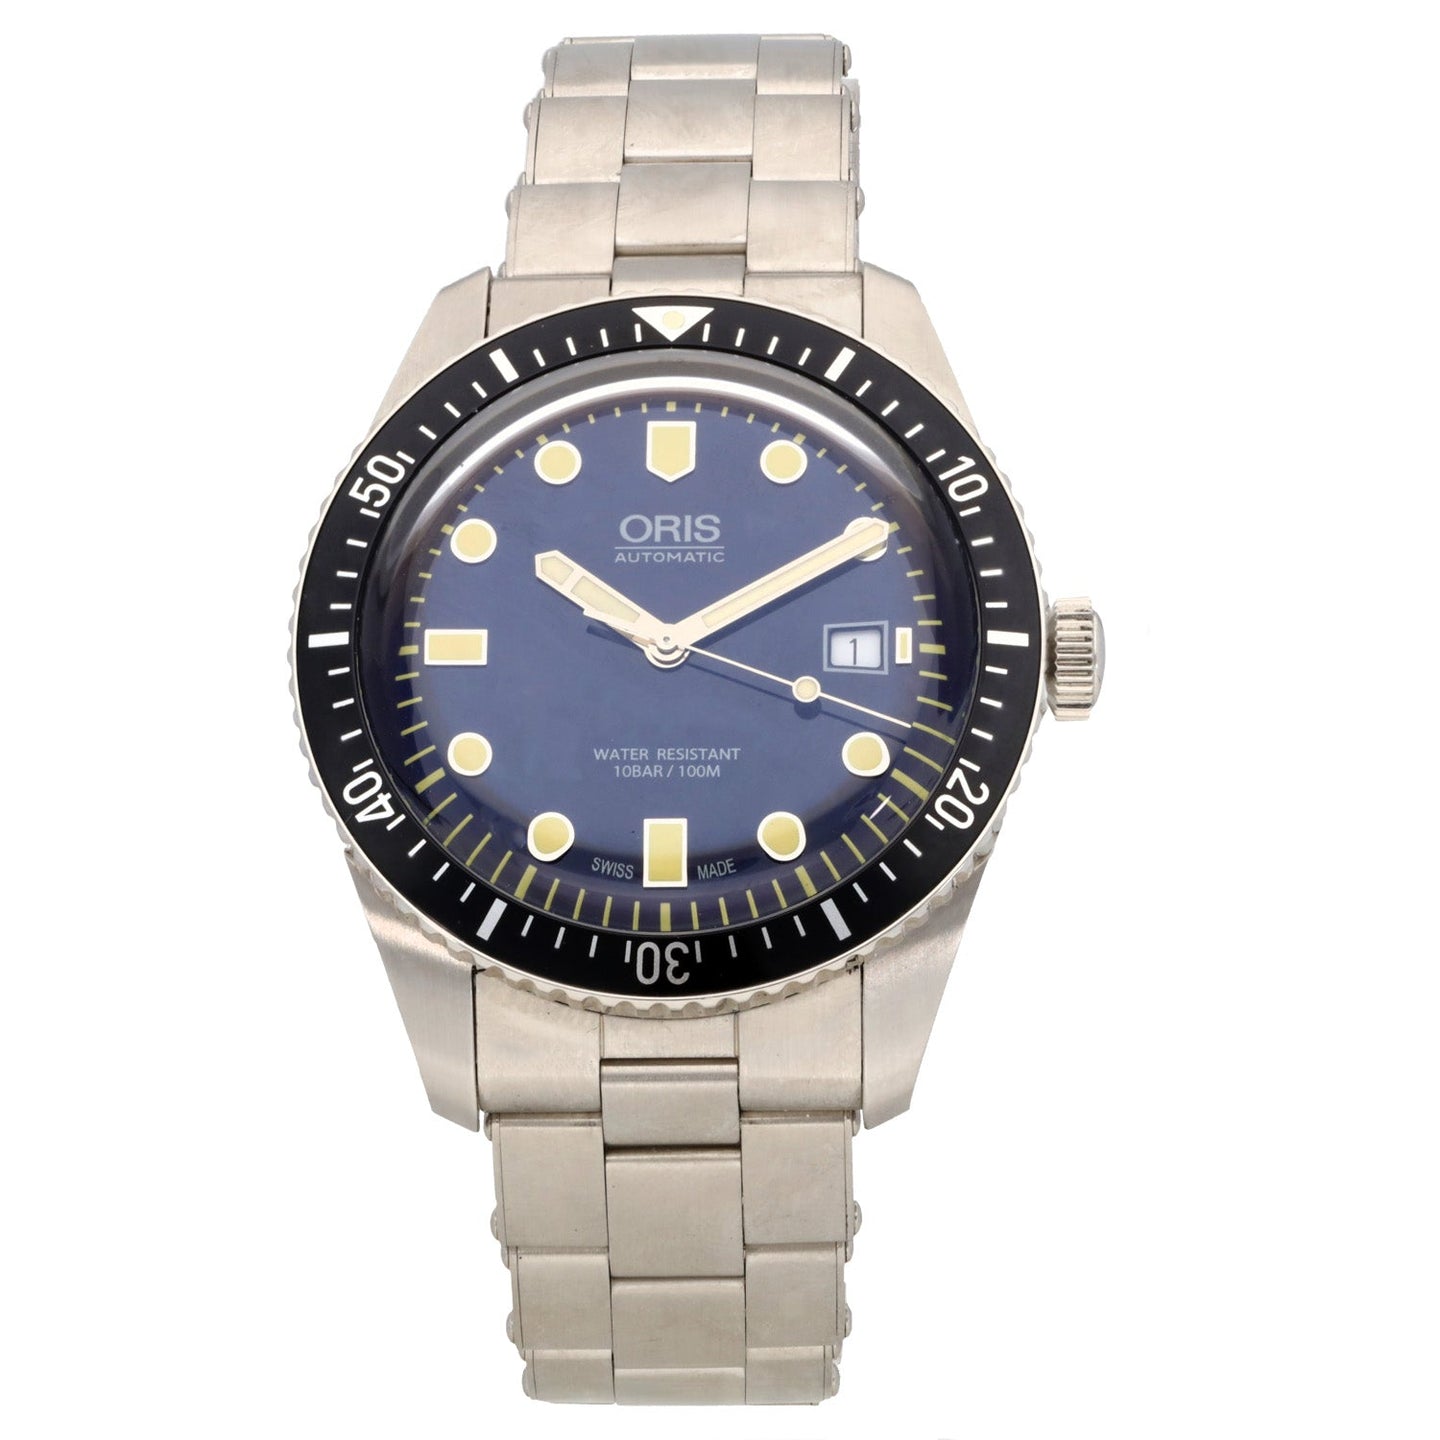 Oris Divers Sixty Five 7720 42mm Stainless Steel Watch